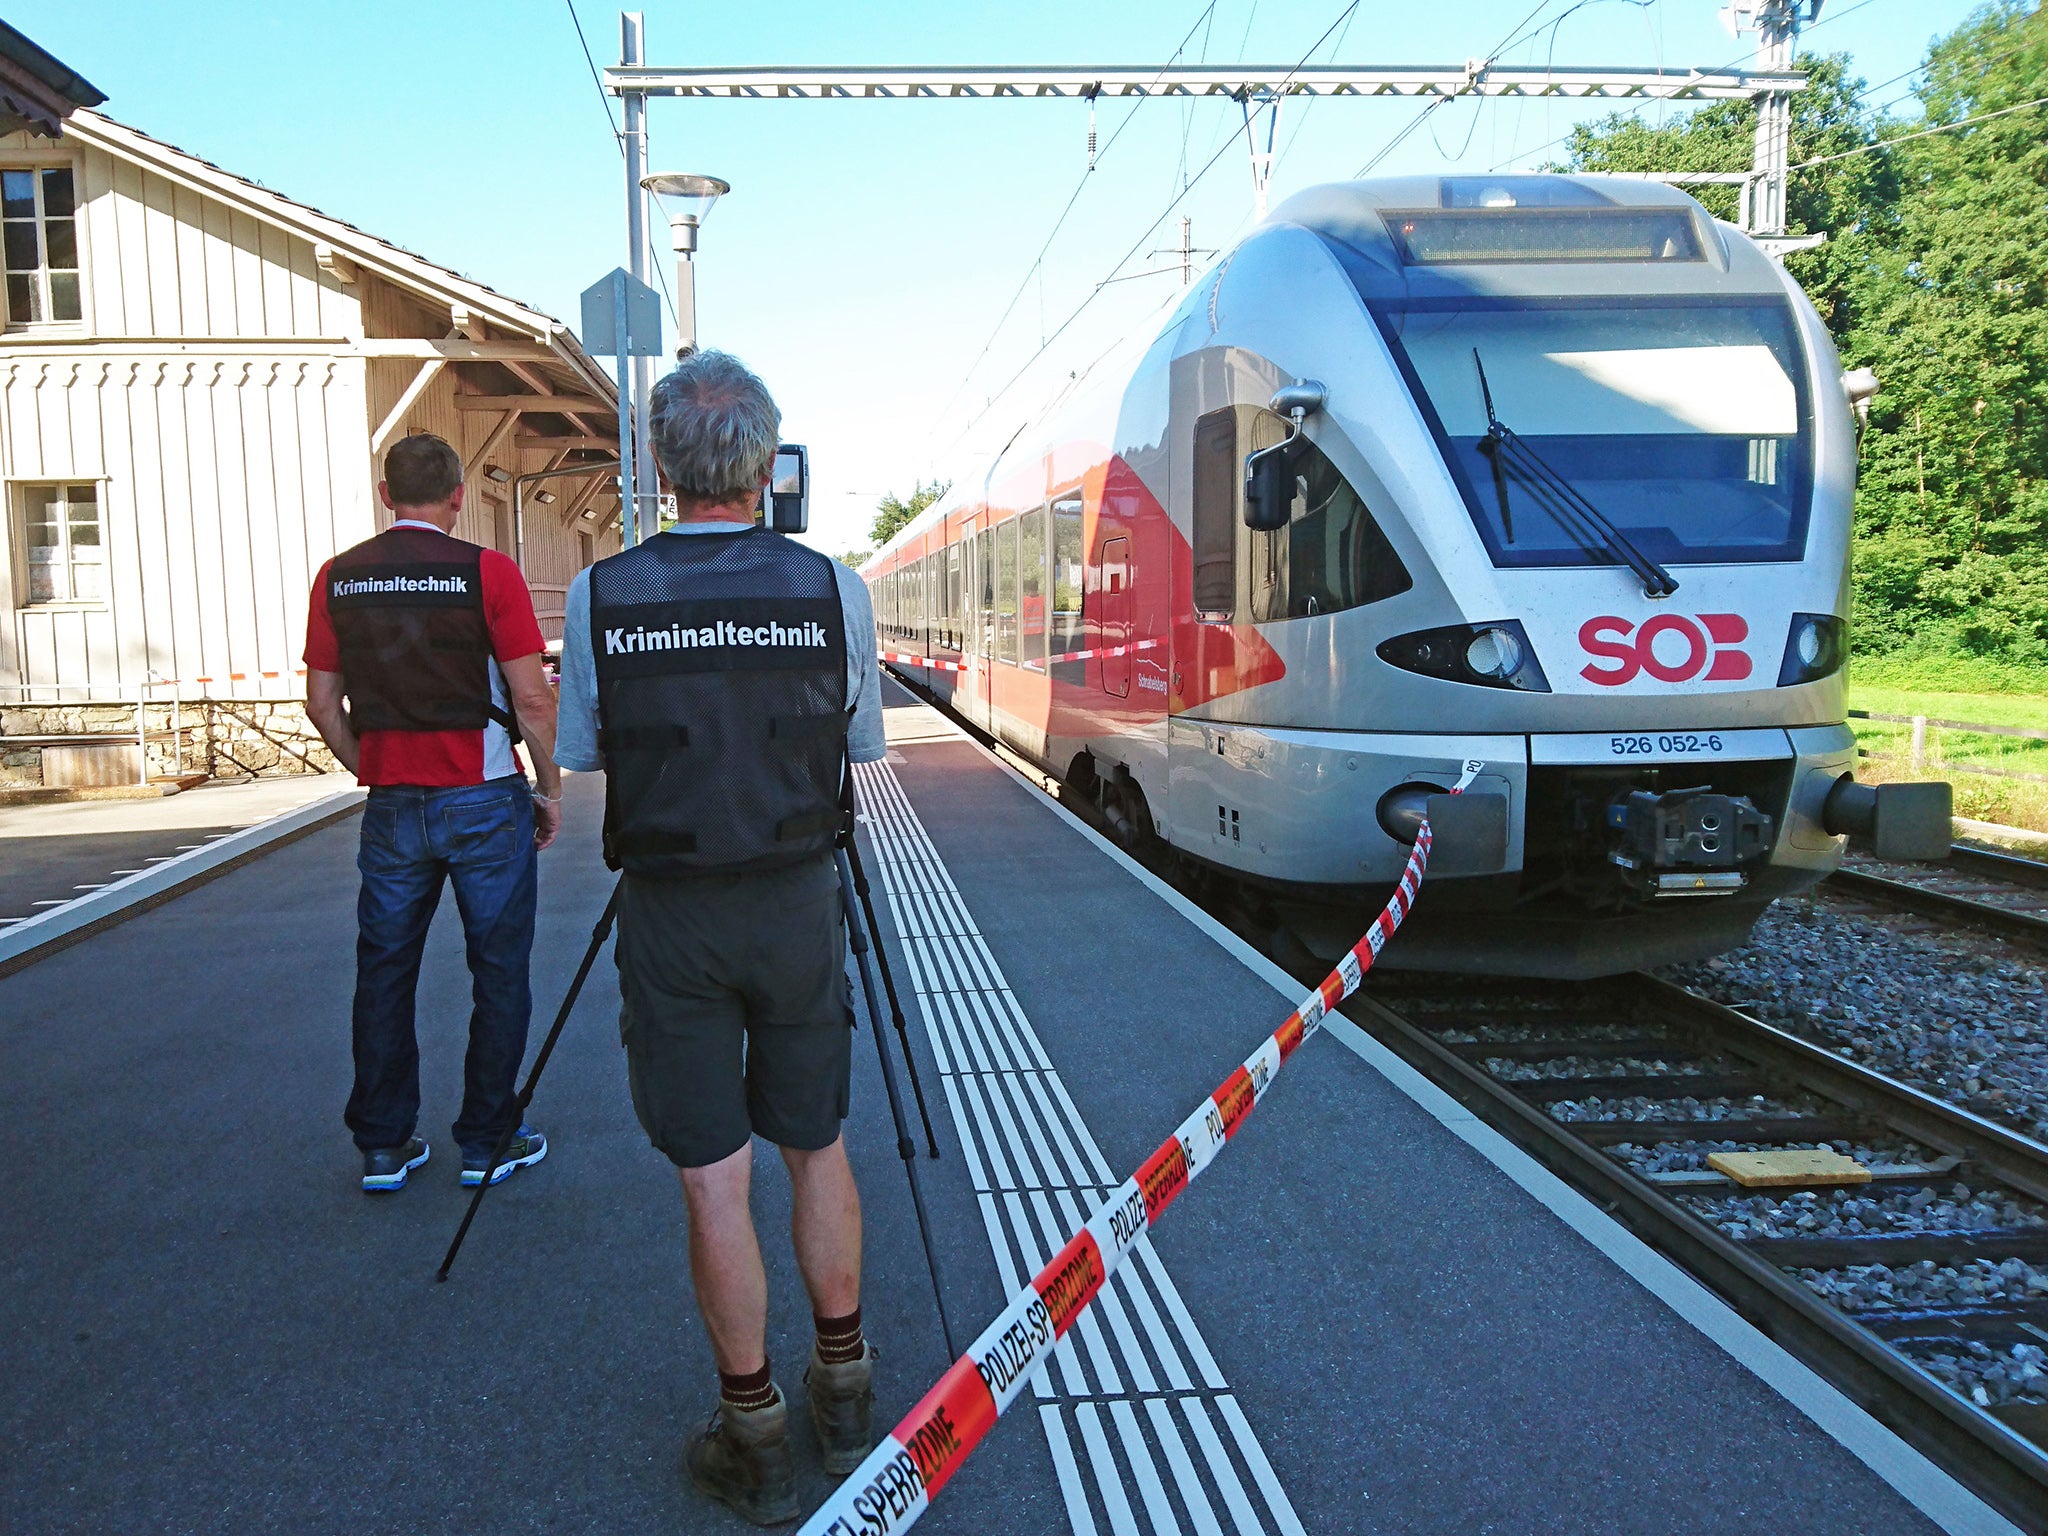 A 34-year-old has died after she was attacked in the carriage when the train pulled into Salez station in eastern Switzerland